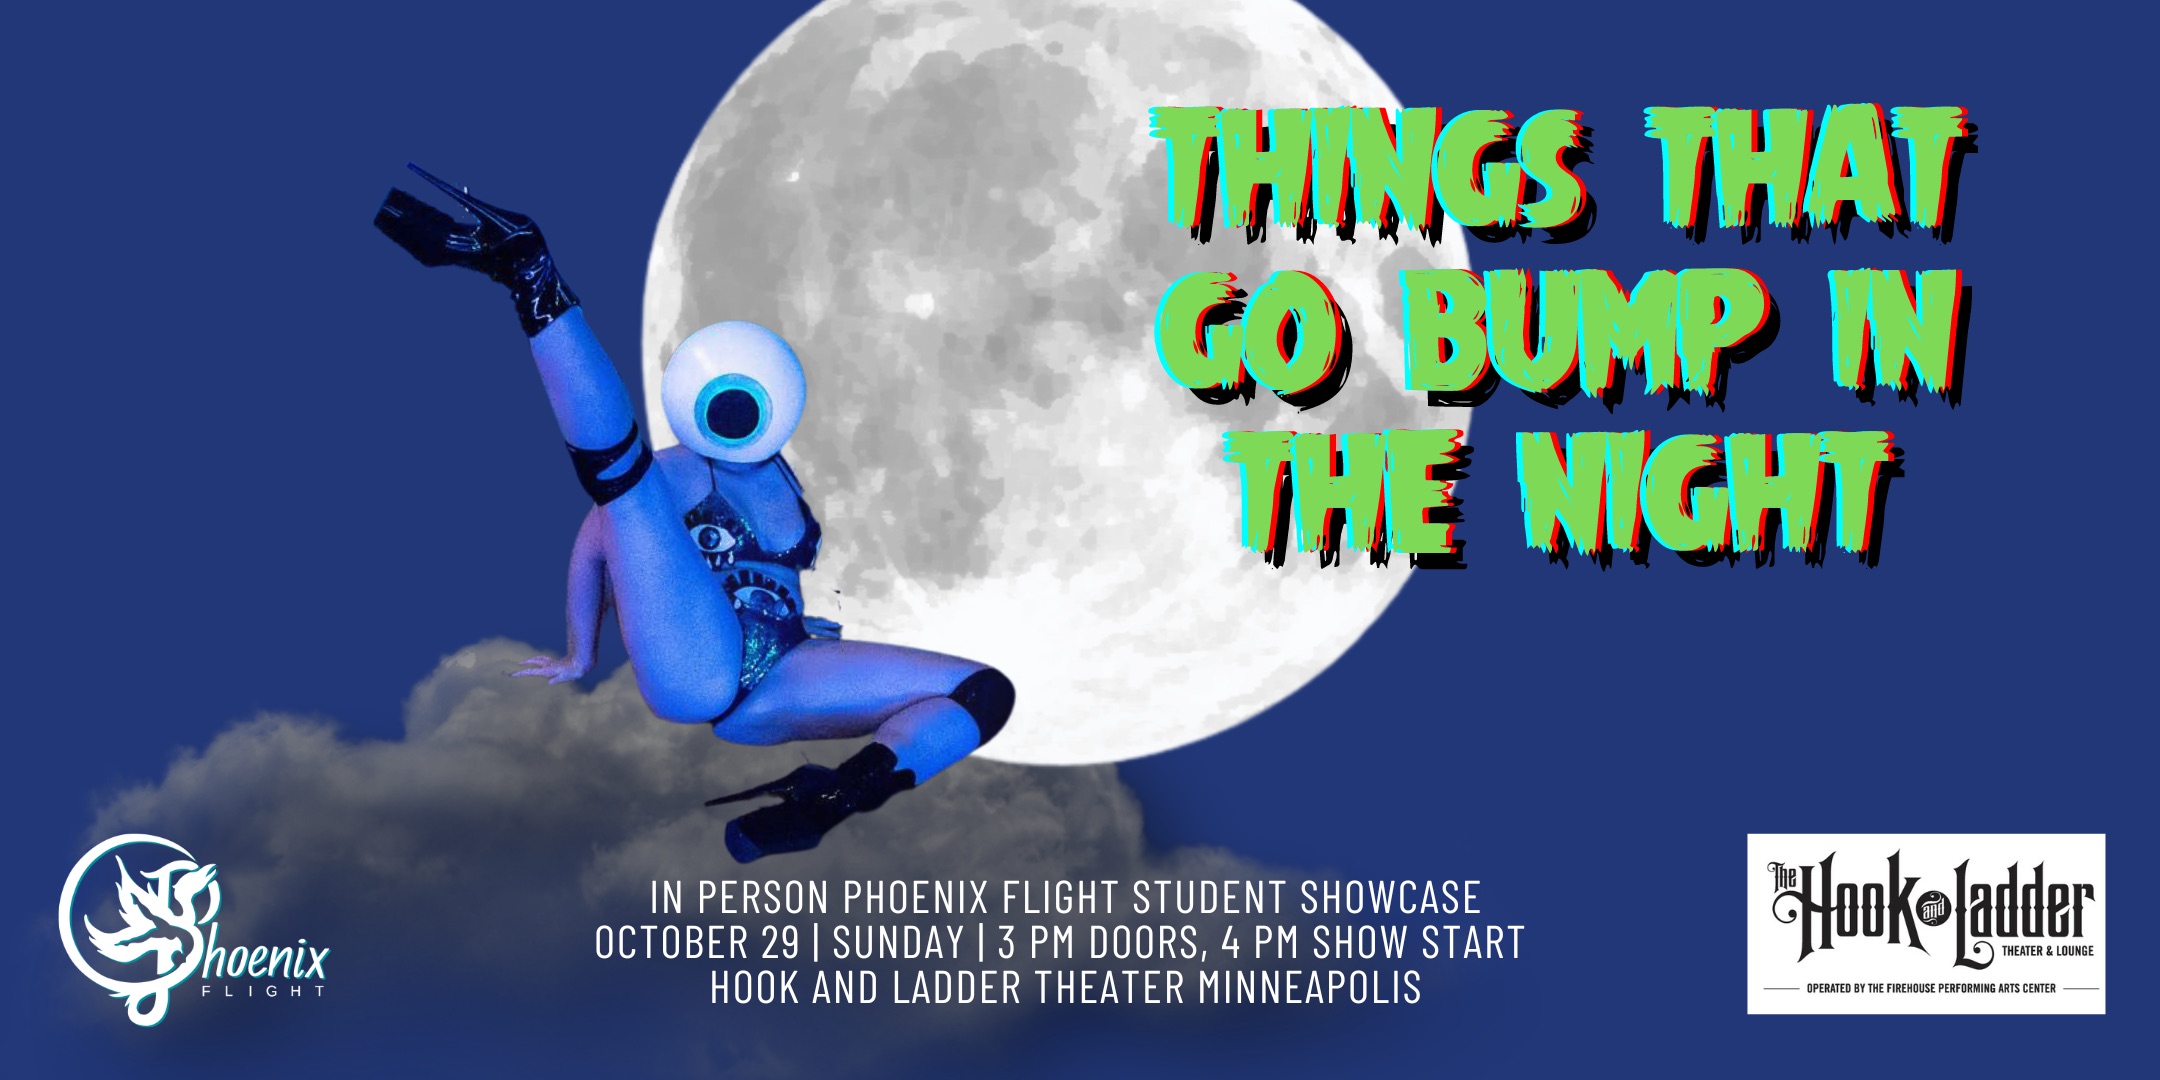 Things That Go Bump In The Night - Phoenix Flight Student Showcase Sunday, October 29 The Hook and Ladder Theater Doors 3:00pm :: Performance 4:00pm GA: $15 ADV / $20 DOS